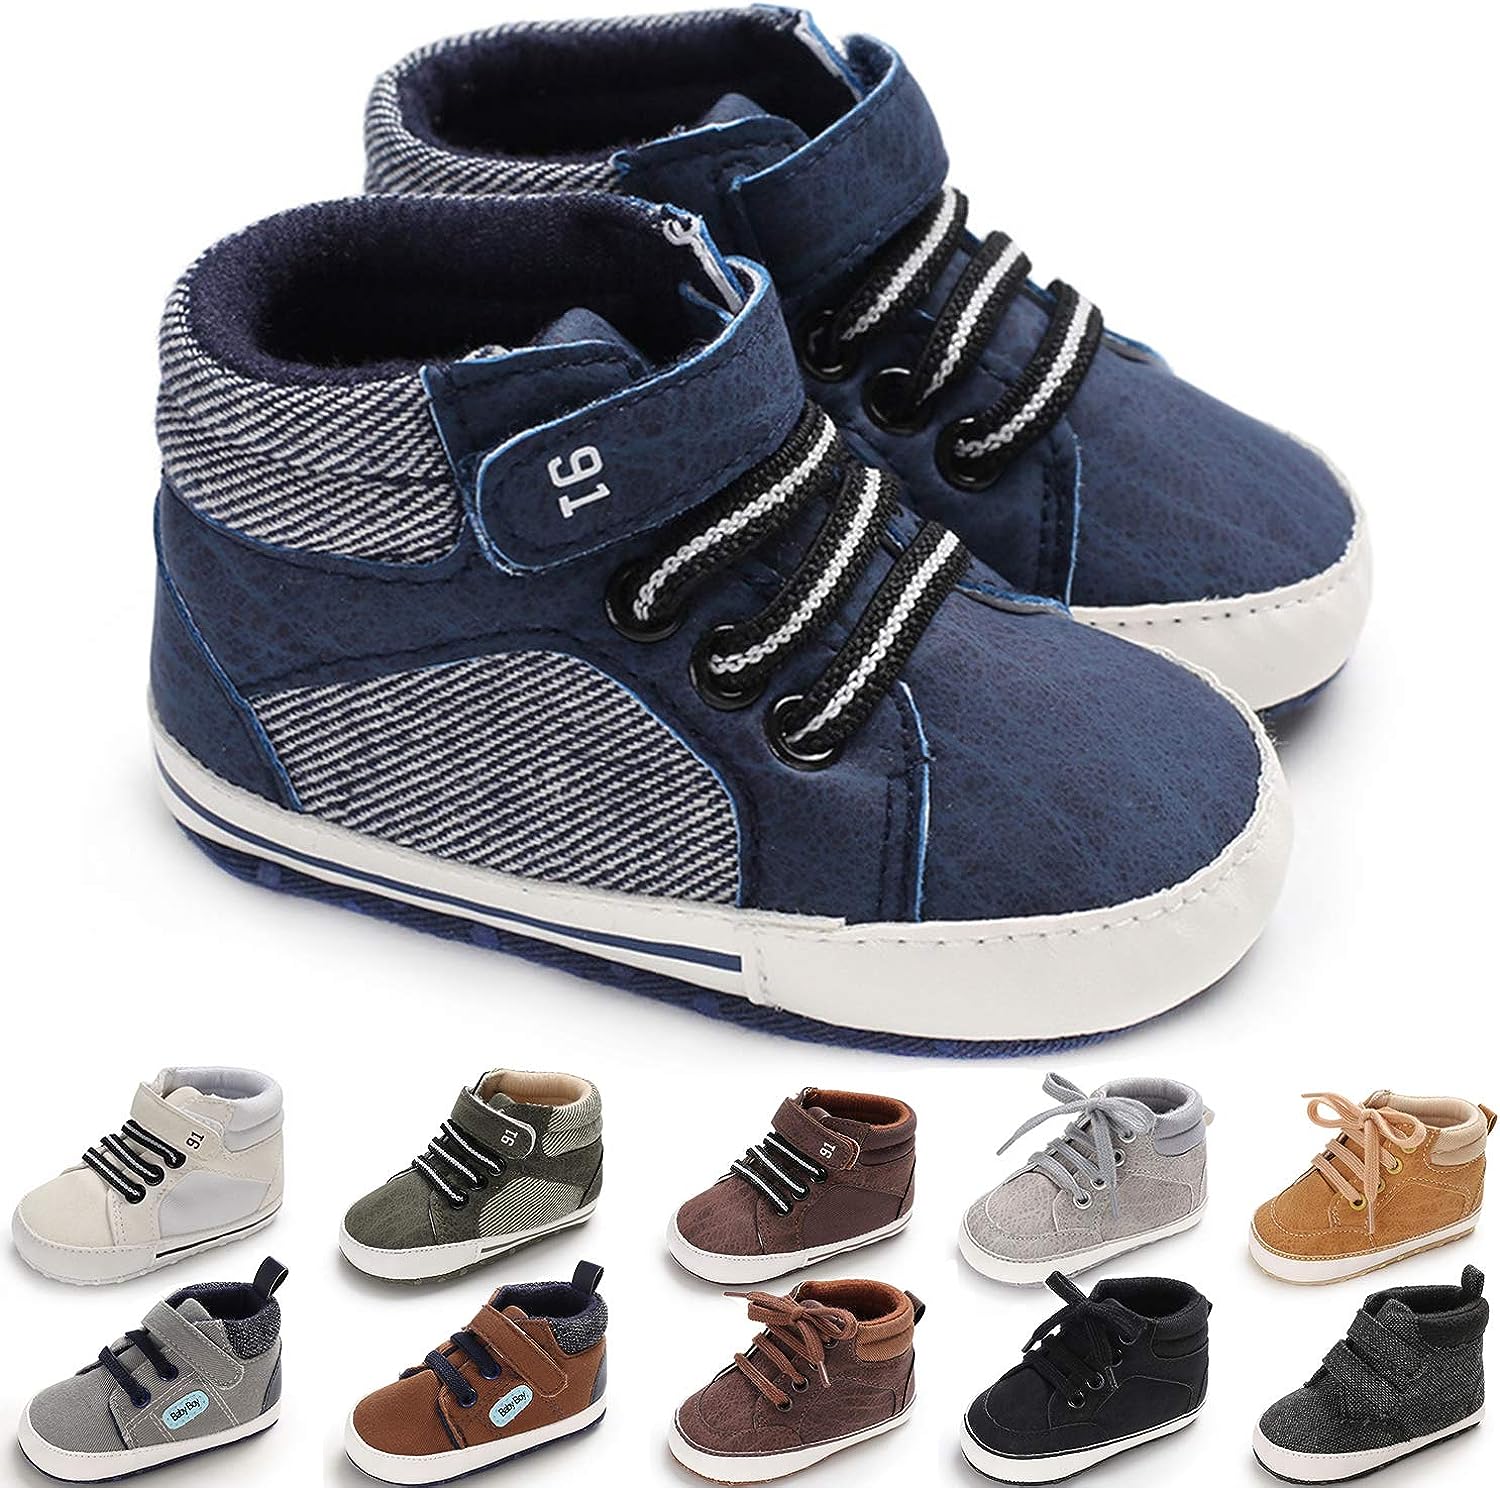 CENCIRILY Baby Boys Girls High Top Sneakers Soft Soles [...]